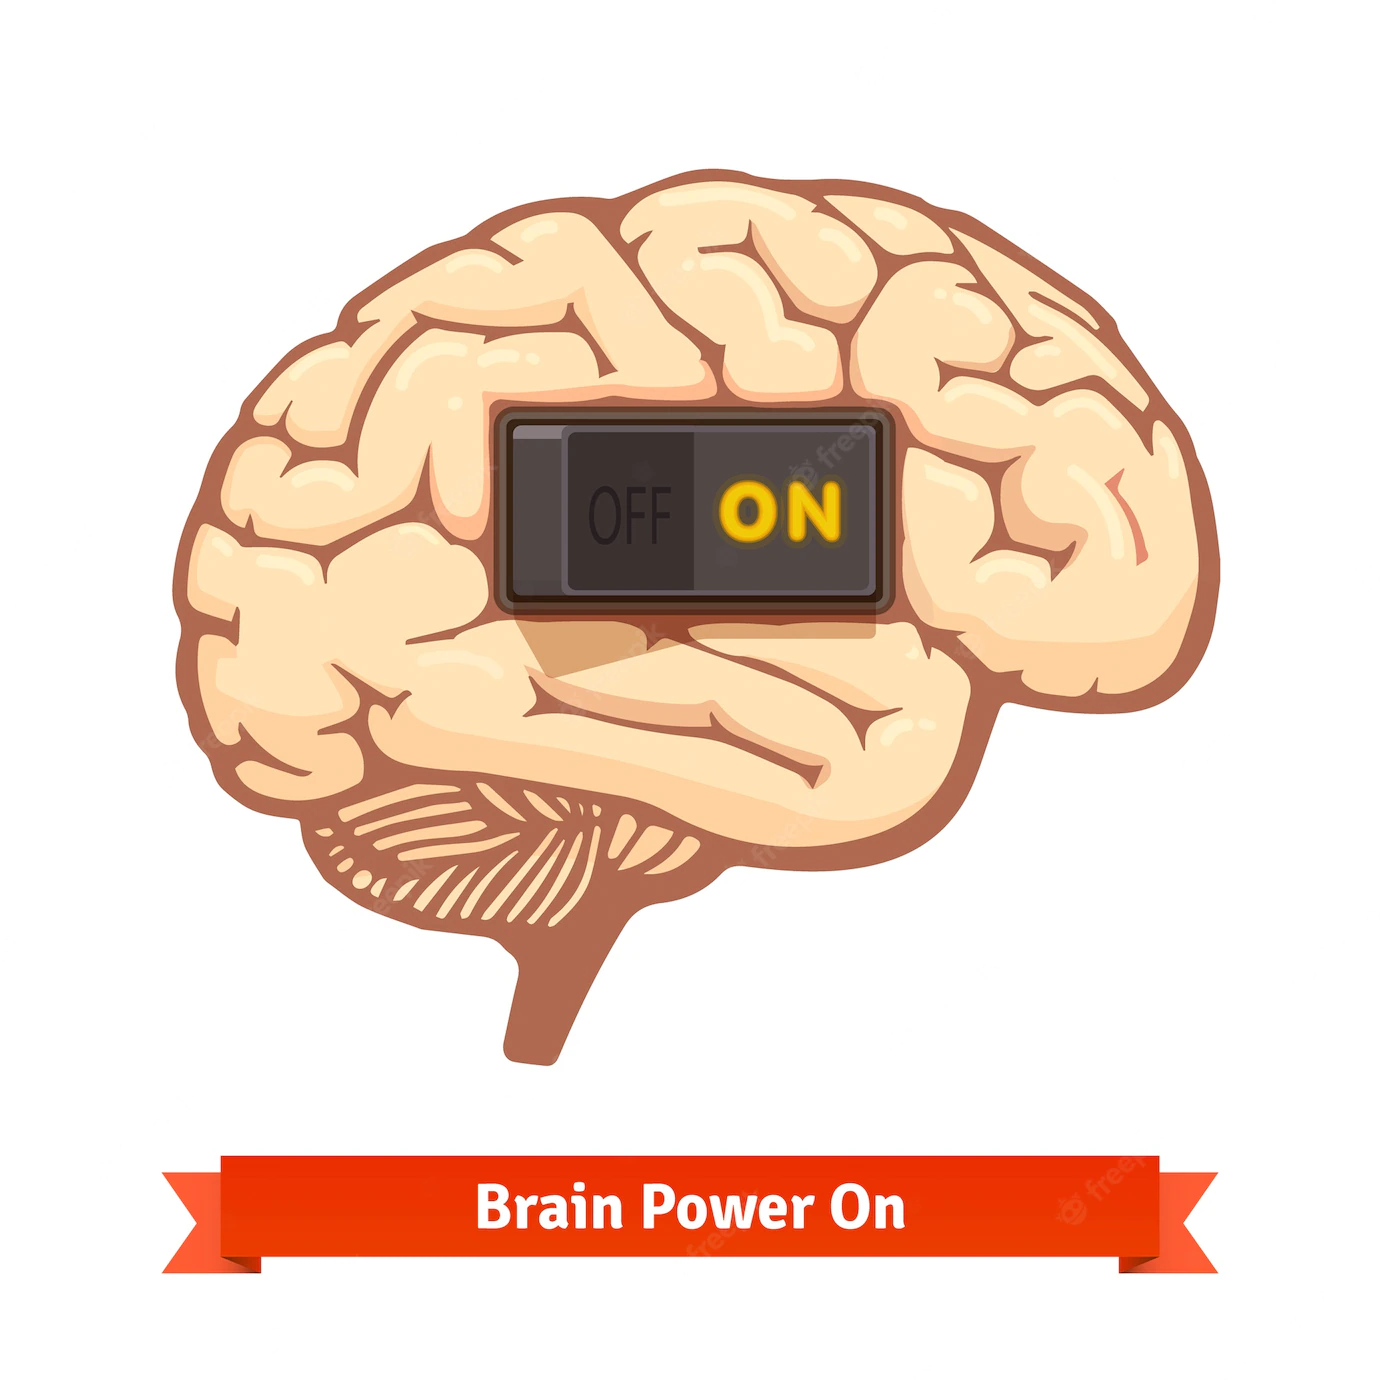 Brain Power Switch Strong Mind Concept 3446 147